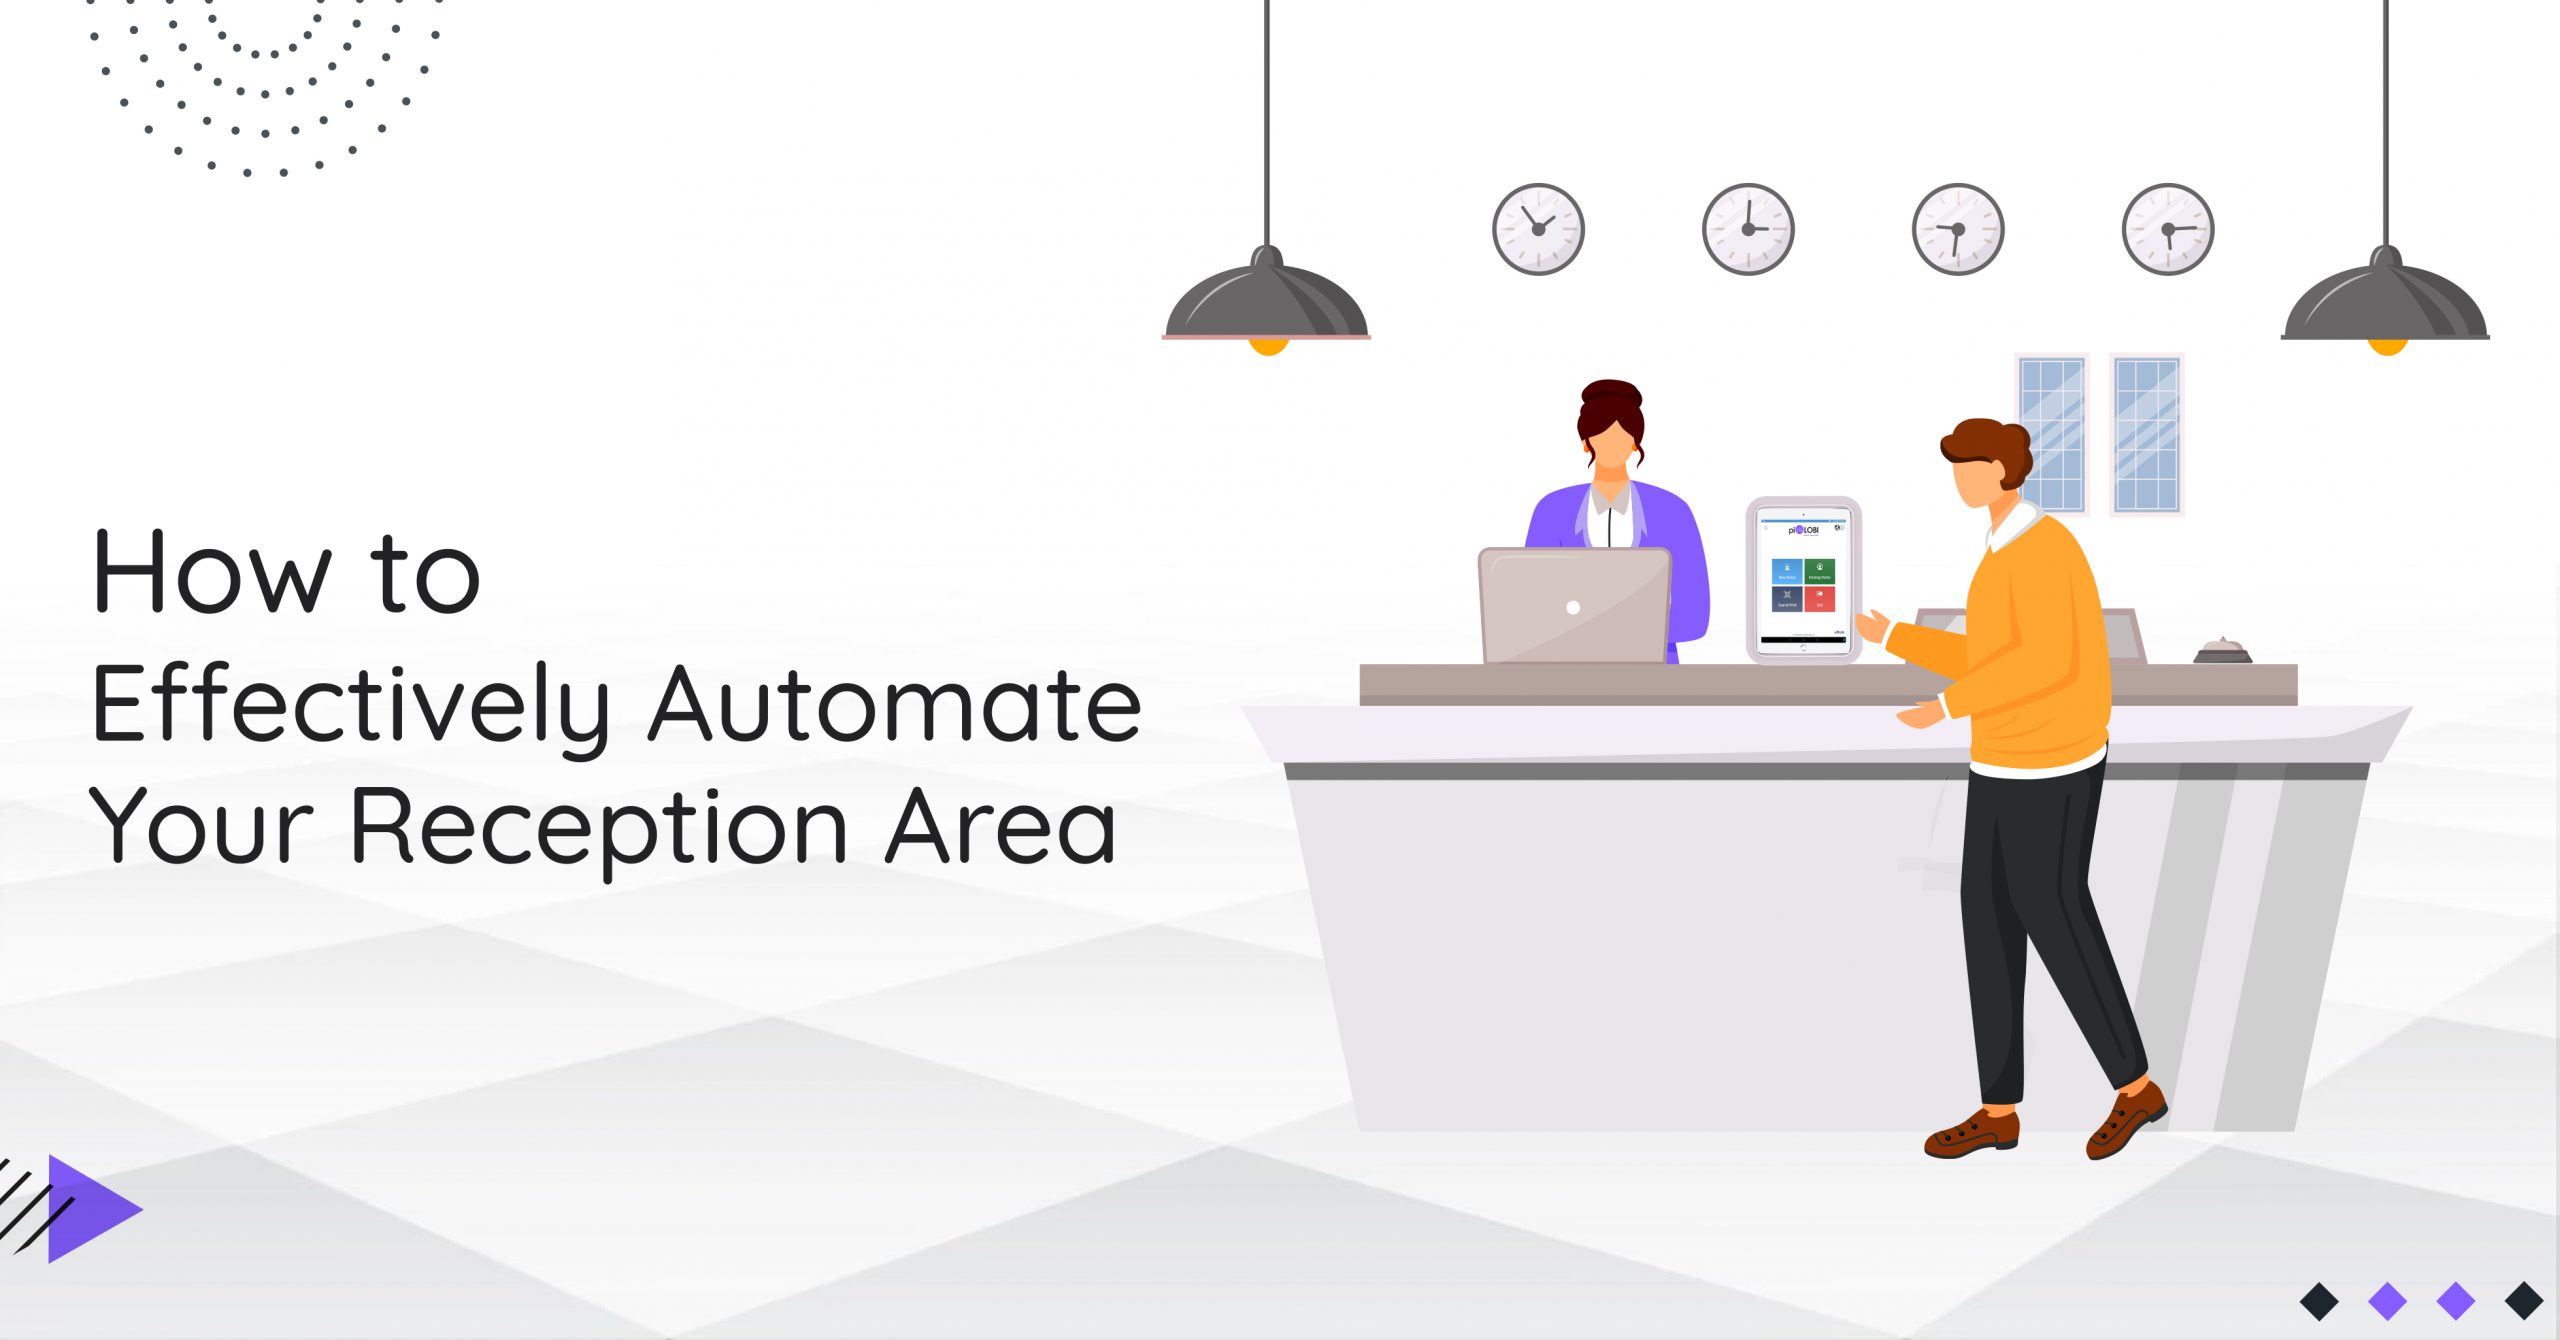 How to Effectively Automate Your Reception Area